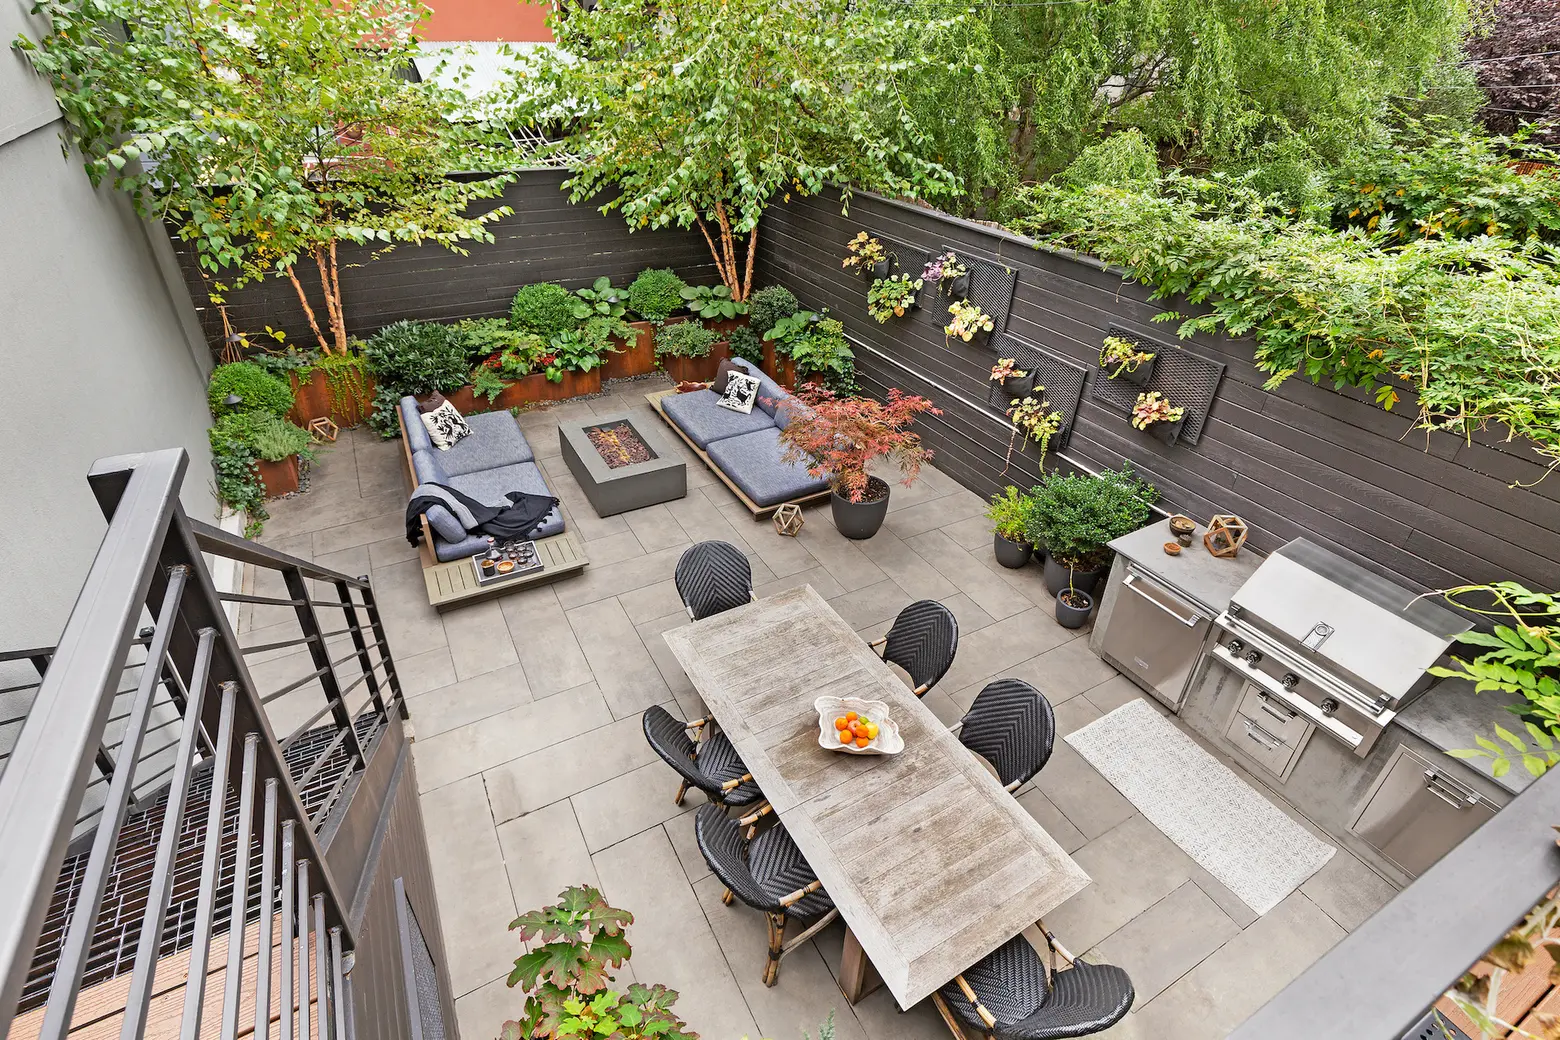 From outdoor kitchen to rooftop garden, this $3.7M Bed-Stuy townhouse could be your summer retreat